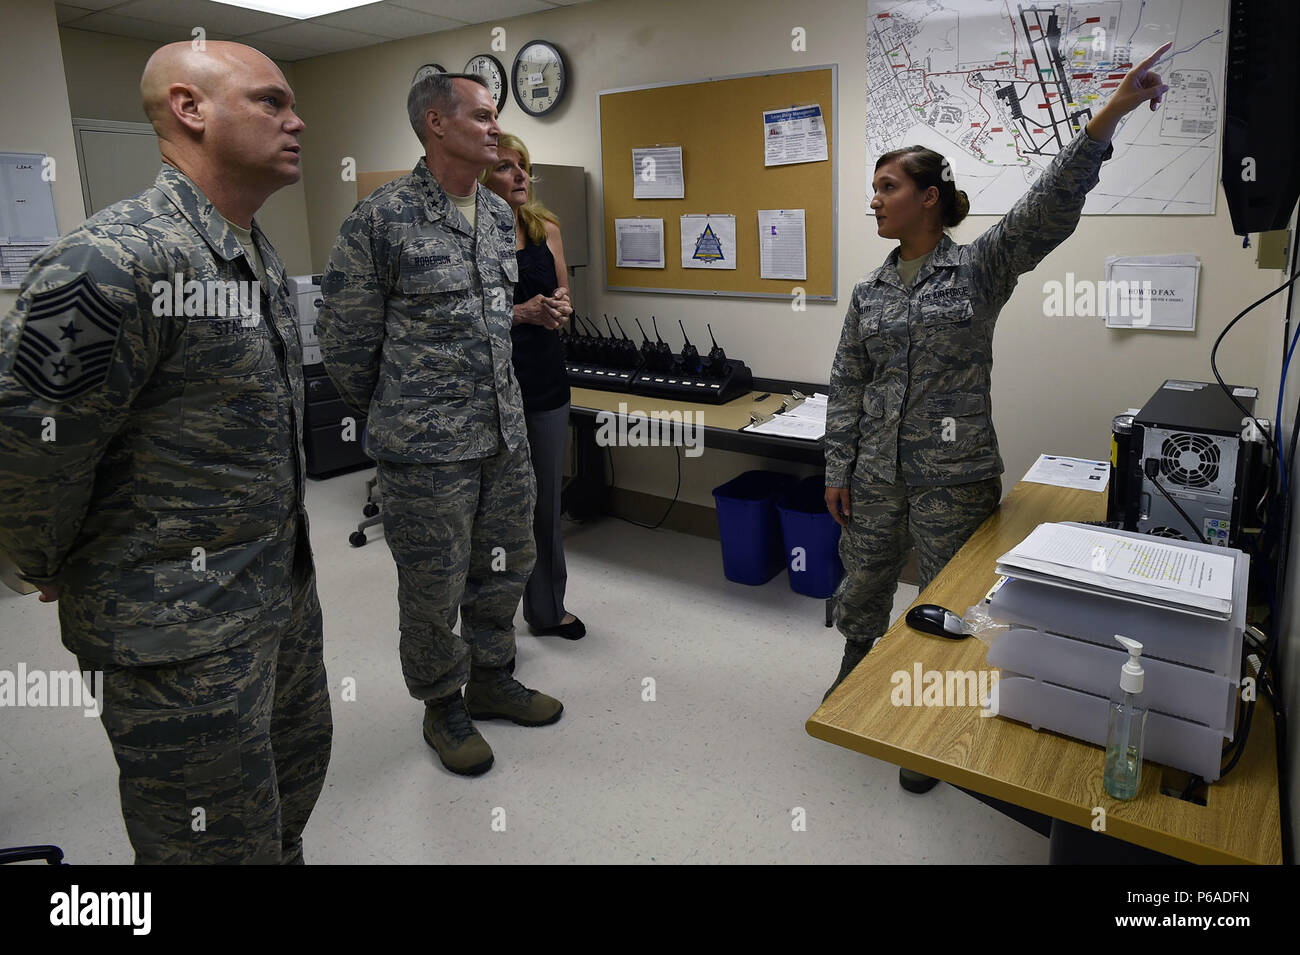 Senior Airman Arlinda Haliti briefs Lt. Gen. Darryl Roberson, commander, Air Education and Training Command, his wife, Cheryl Roberson, and AETC Command Chief Master Sgt. David Staton, on the En-Route Patient Staging System facility and mission May 11 at the Wilford Hall Ambulatory Surgical Center, Joint Base San Antonio-Lackland. Roberson and Staton visited the WHASC May11, meeting with 59th Medical Wing senior leaders and Airmen to learn more about the wing’s mission of developing warrior medics through patient-centered health care and continuous improvement. Haliti is an aerospace medical t Stock Photo